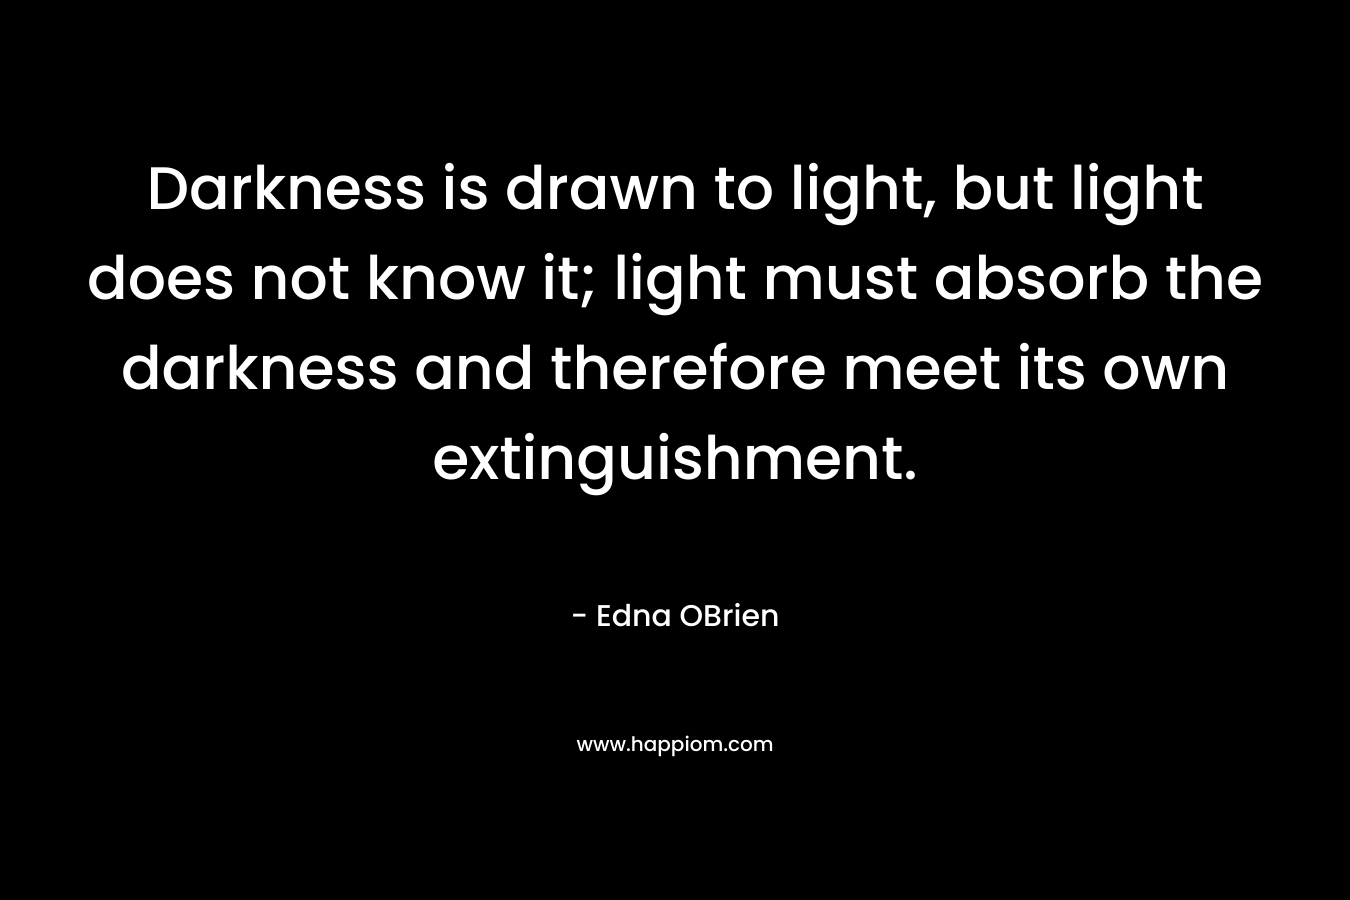 Darkness is drawn to light, but light does not know it; light must absorb the darkness and therefore meet its own extinguishment. – Edna OBrien